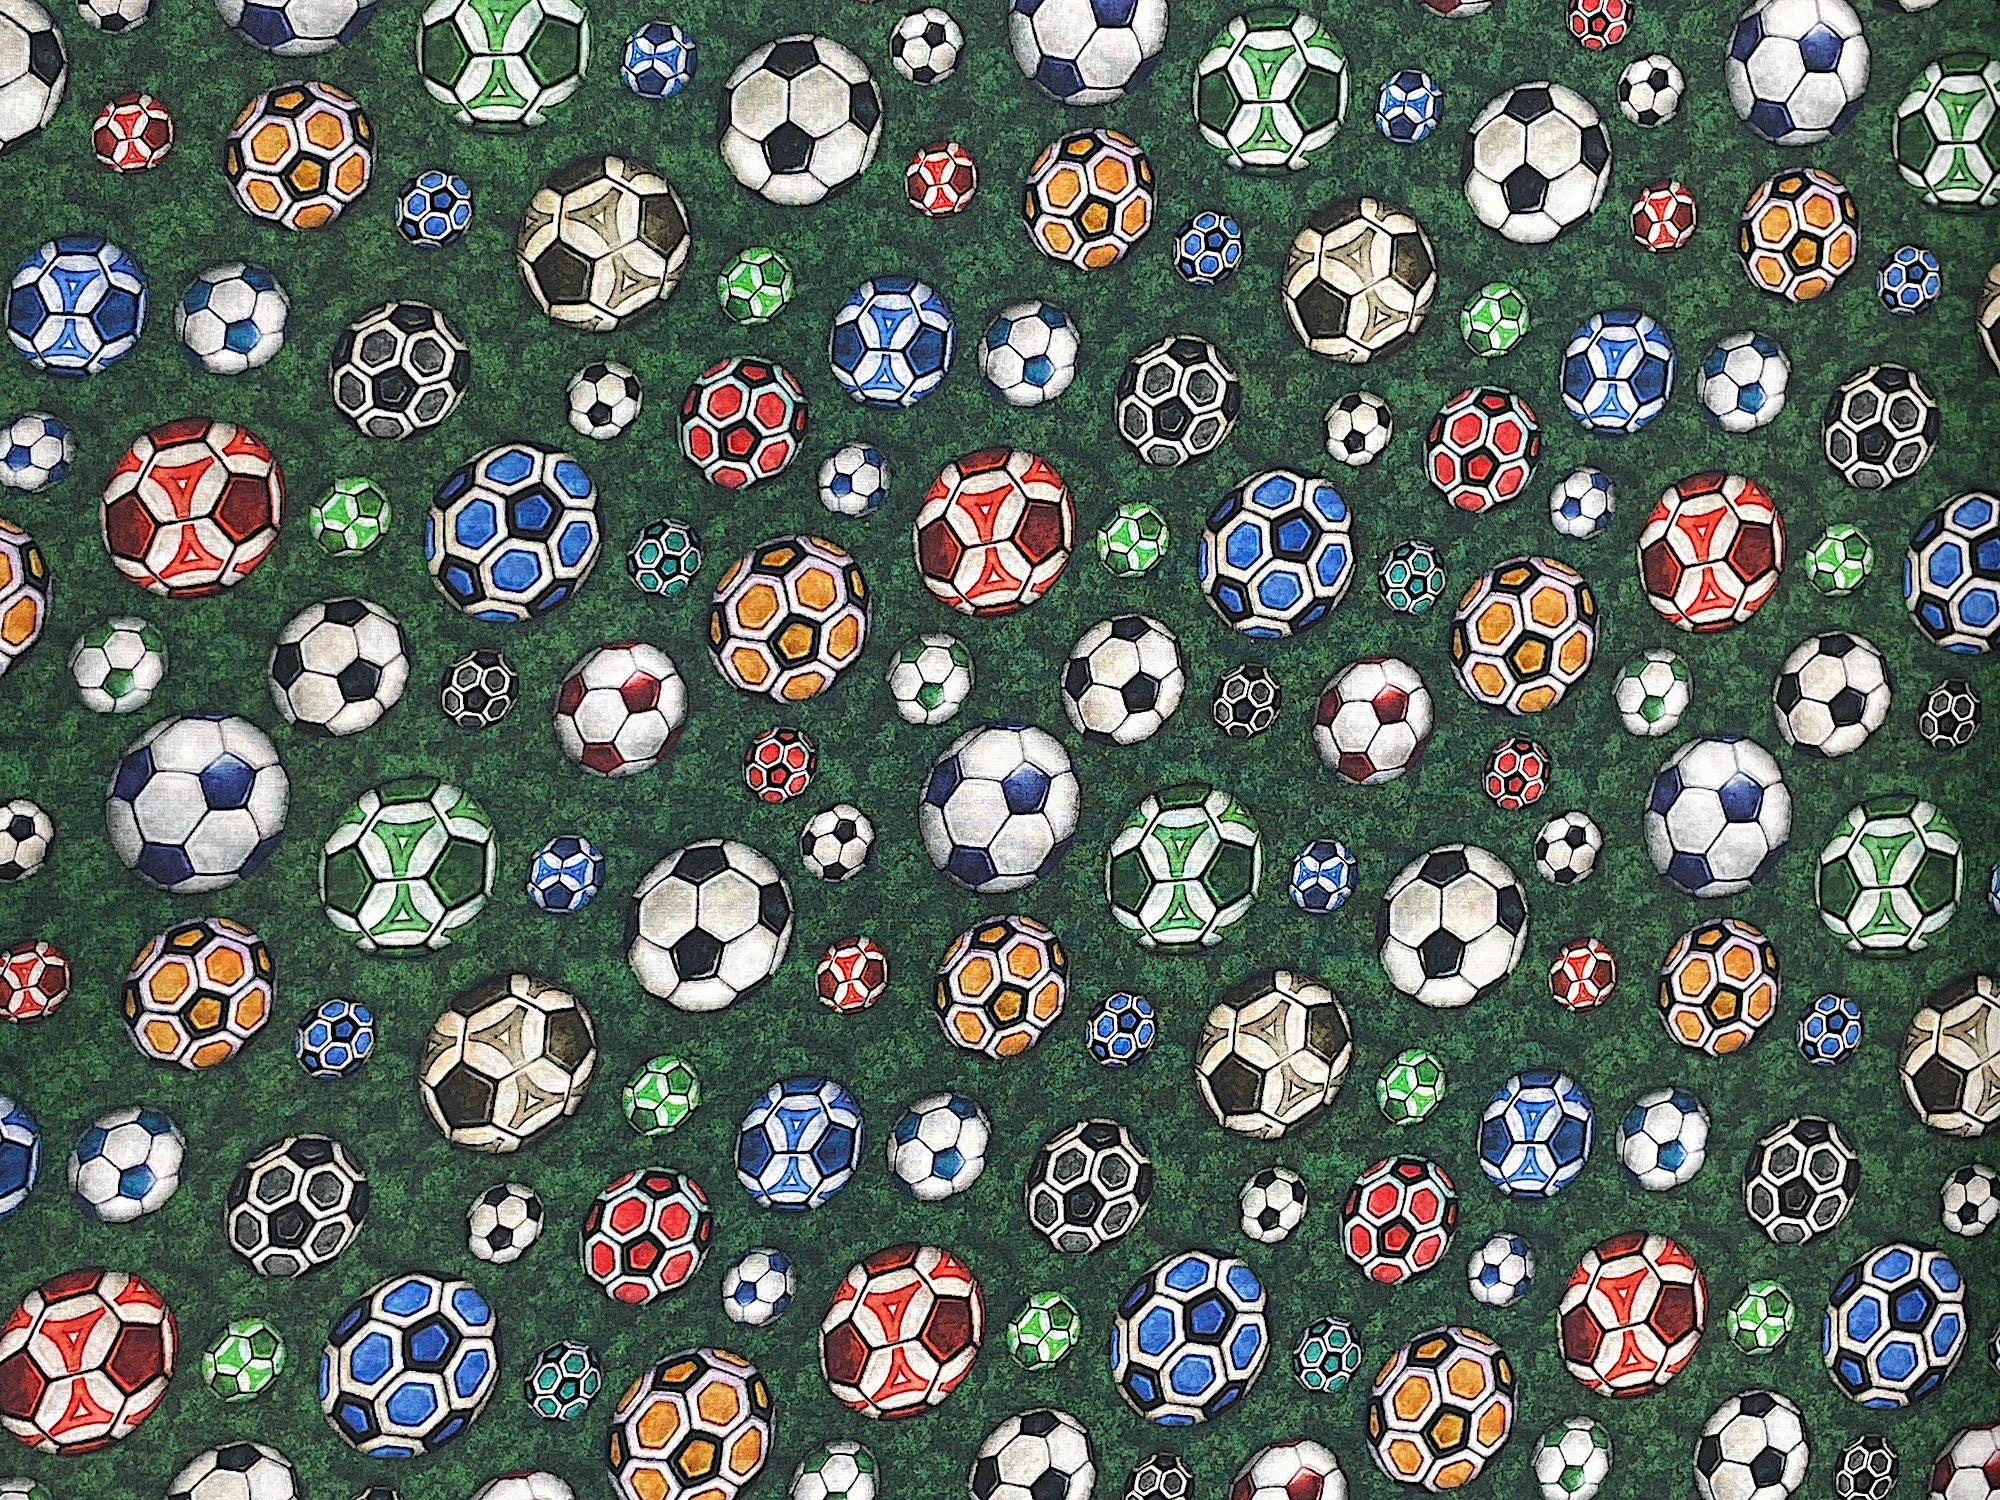 This green cotton fabric is covered with soccer balls. The soccer balls are blue, red, yellow, orange, white and black. This fabric is part of the Just For Kicks collection by QT Fabrics.